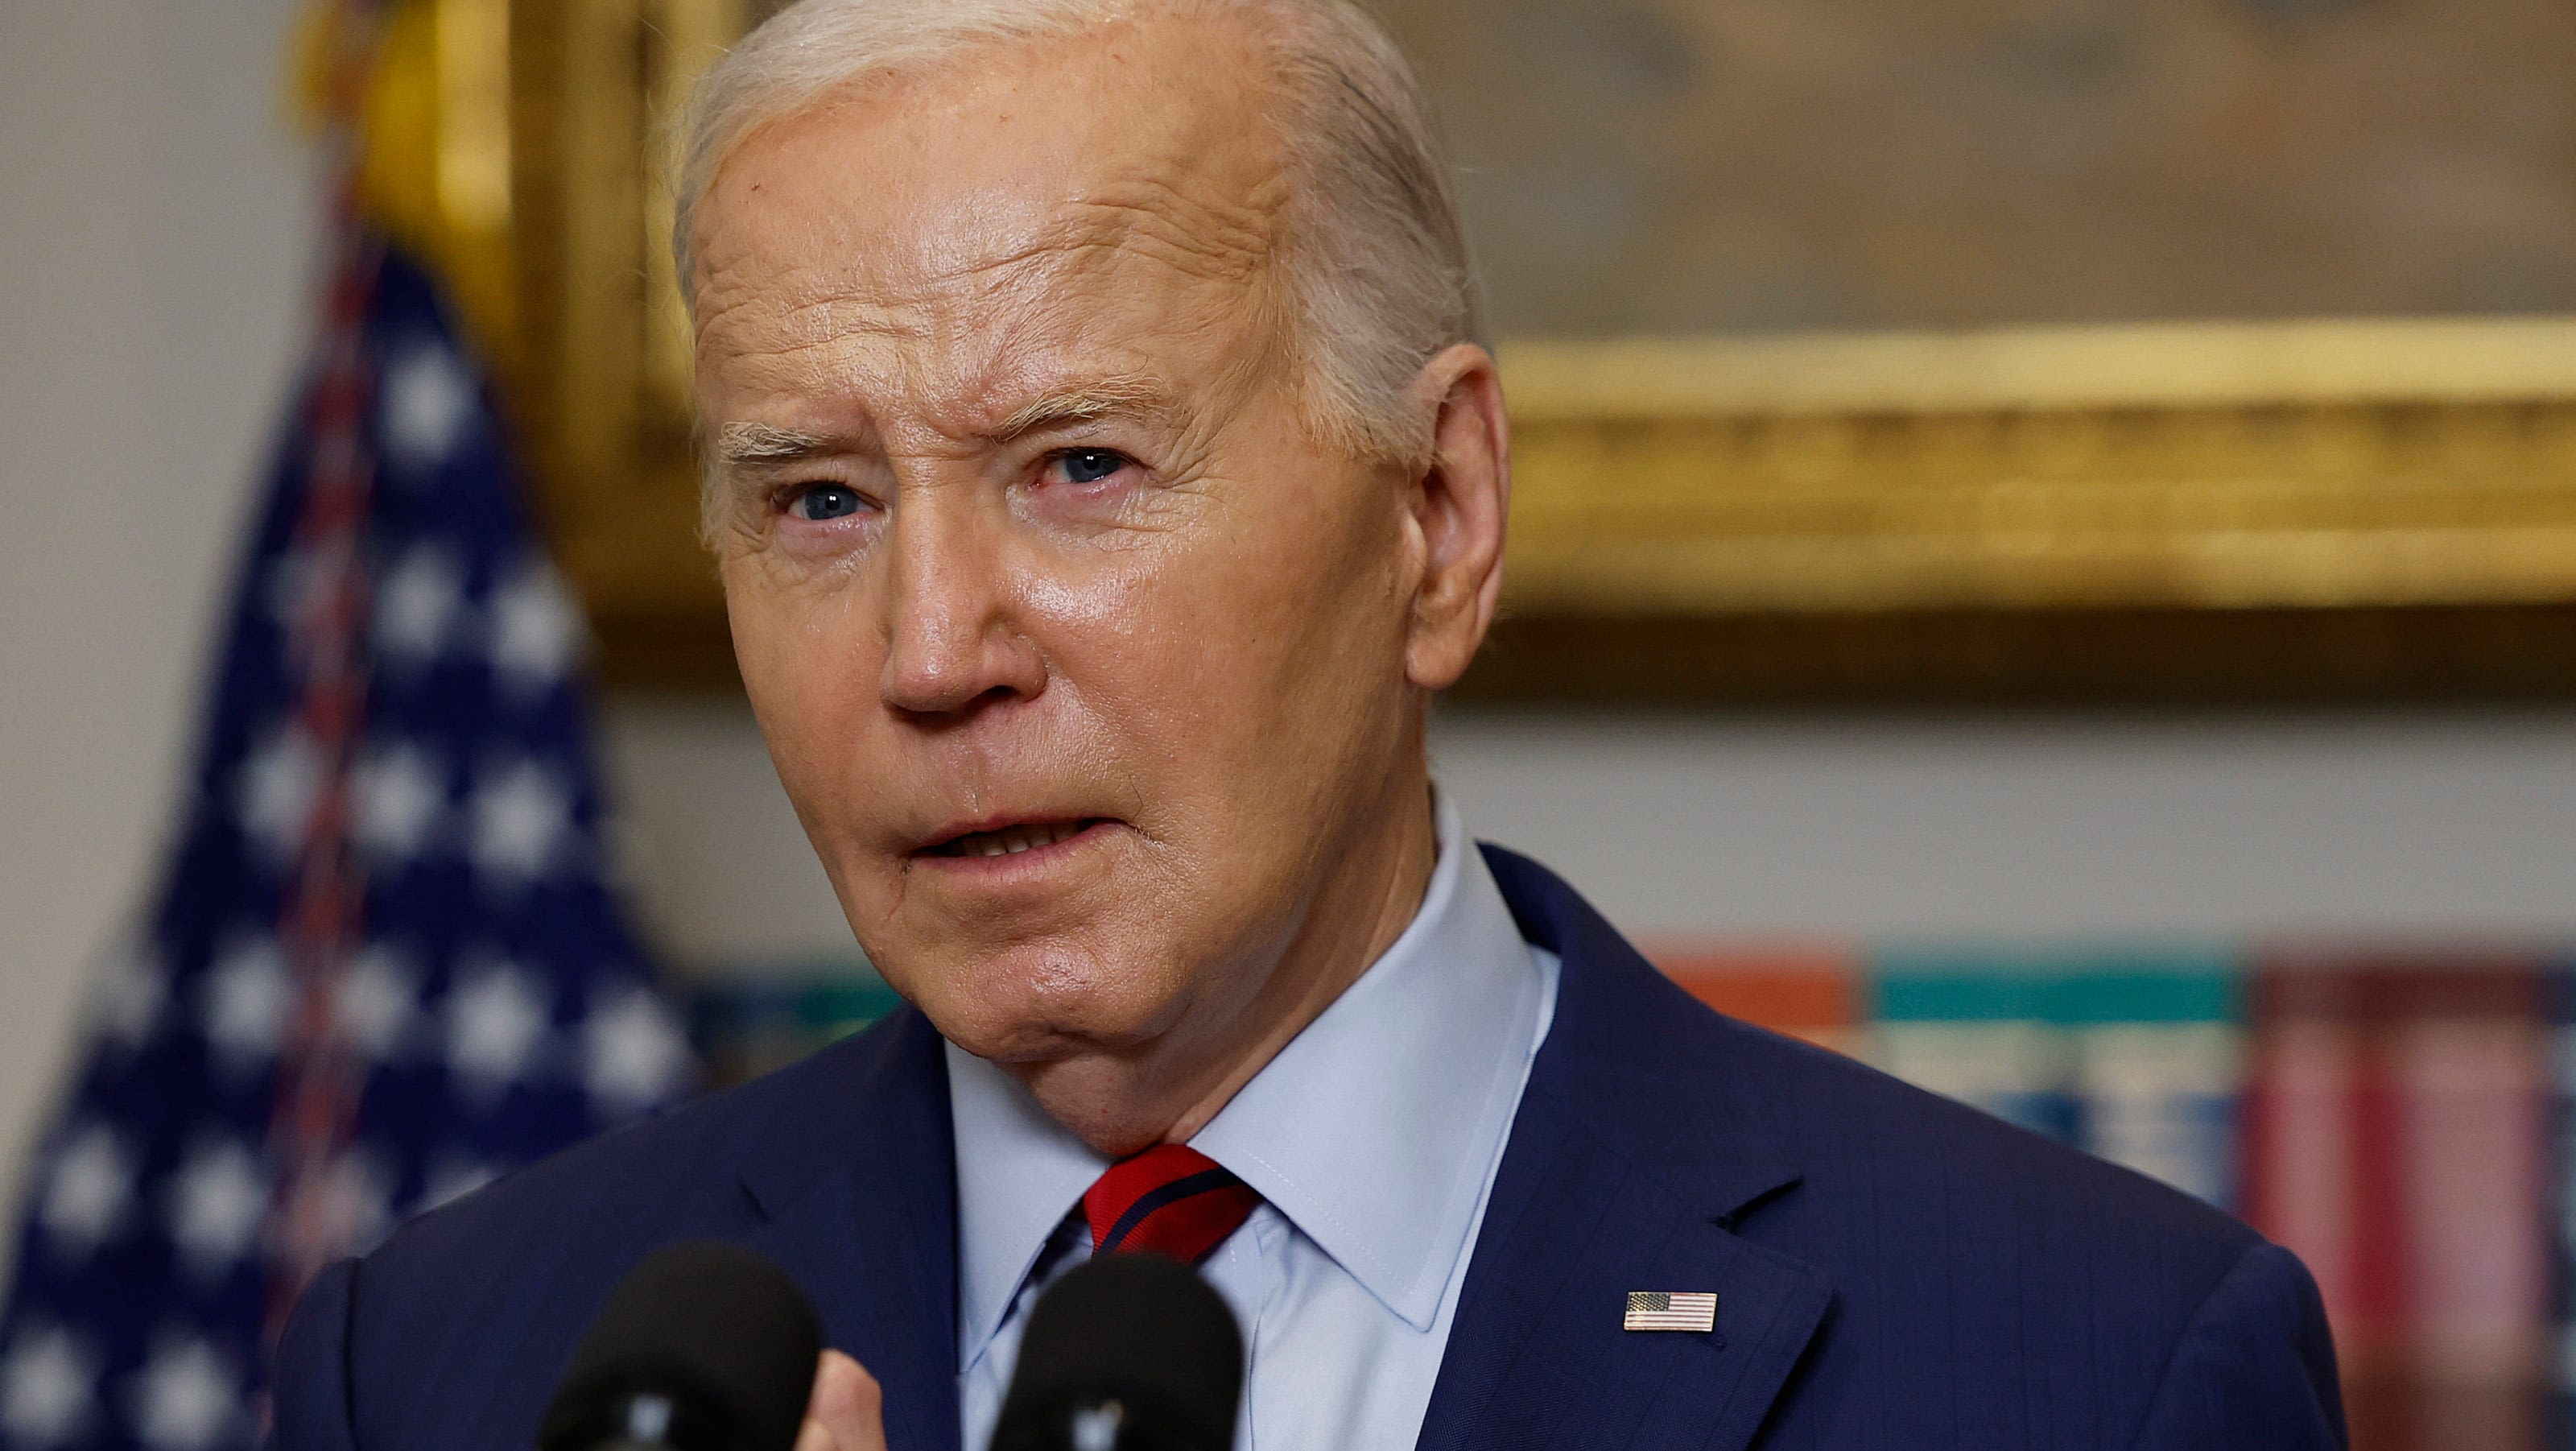 'Not supplying the weapons' to Israel if there's a major Gaza offensive, Biden says